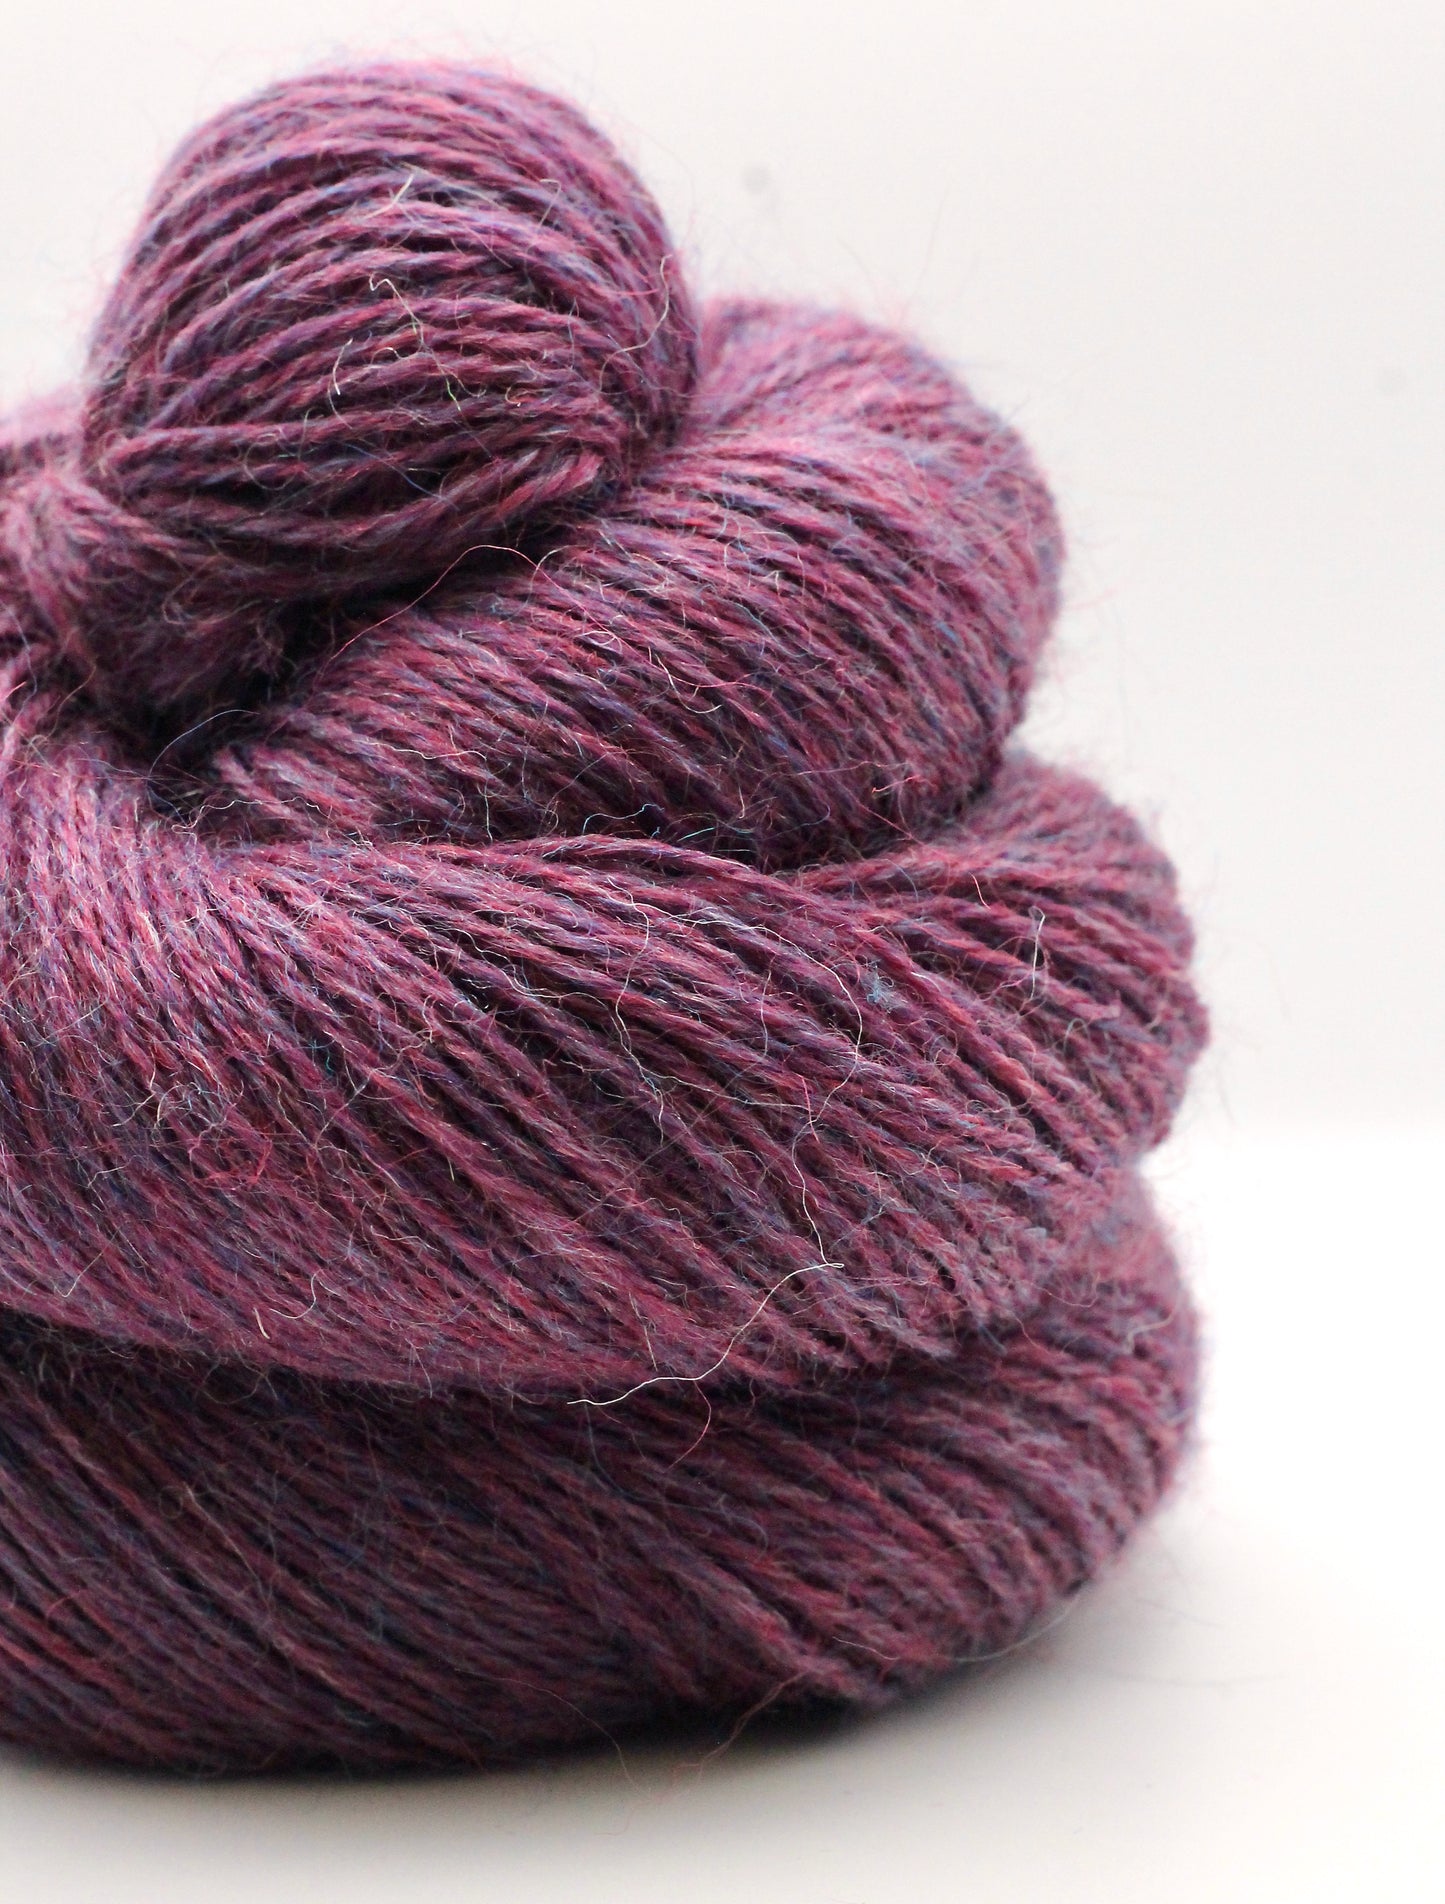 Devonia 4ply 100g skein 388 metres LIMITED EDITION